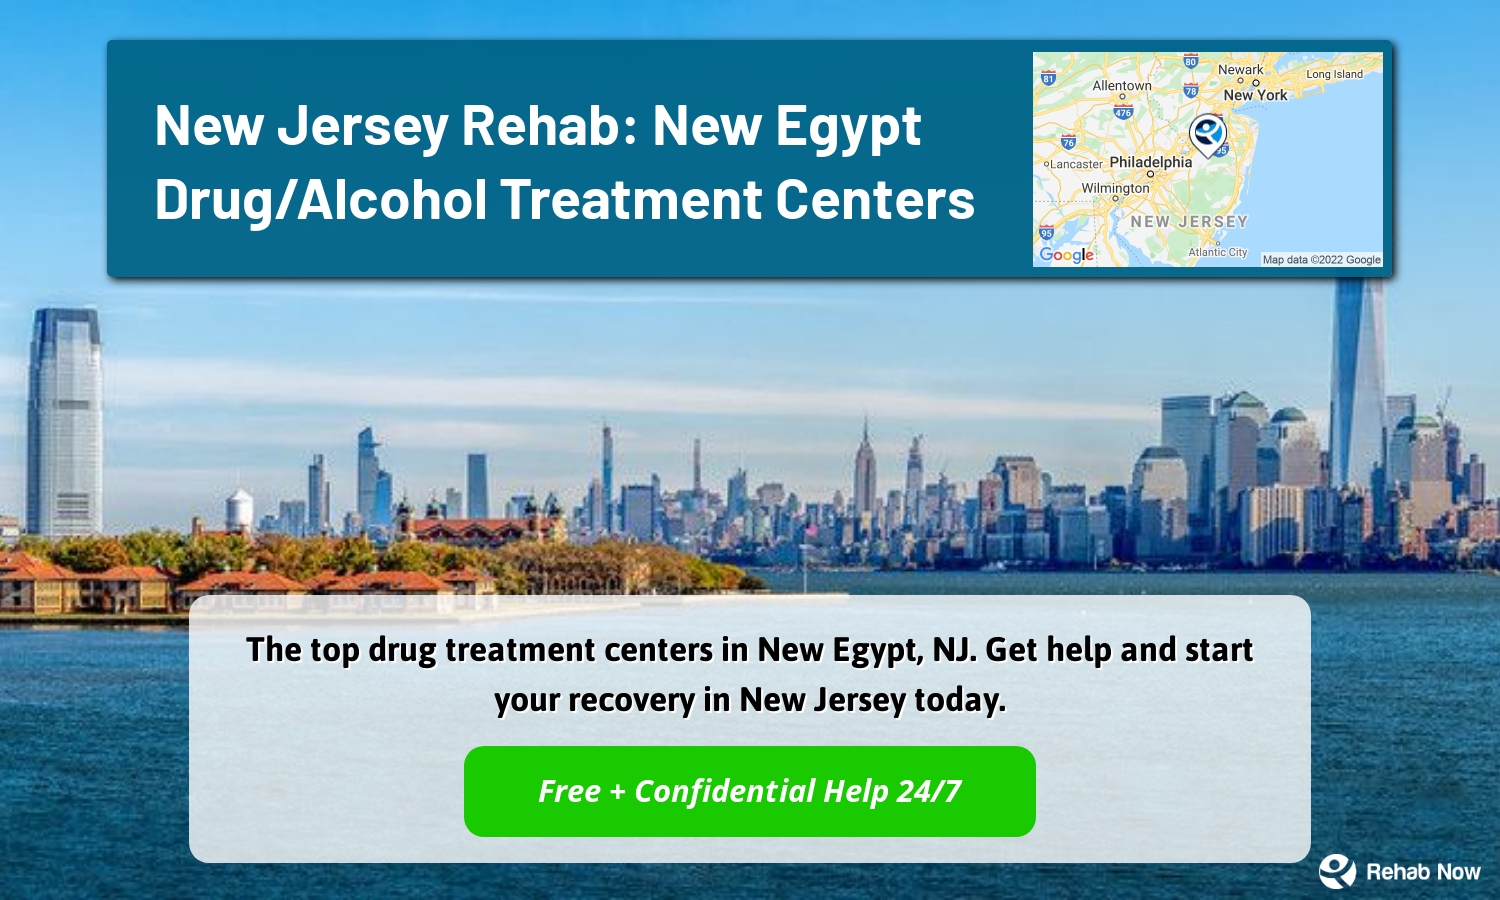 The top drug treatment centers in New Egypt, NJ. Get help and start your recovery in New Jersey today.